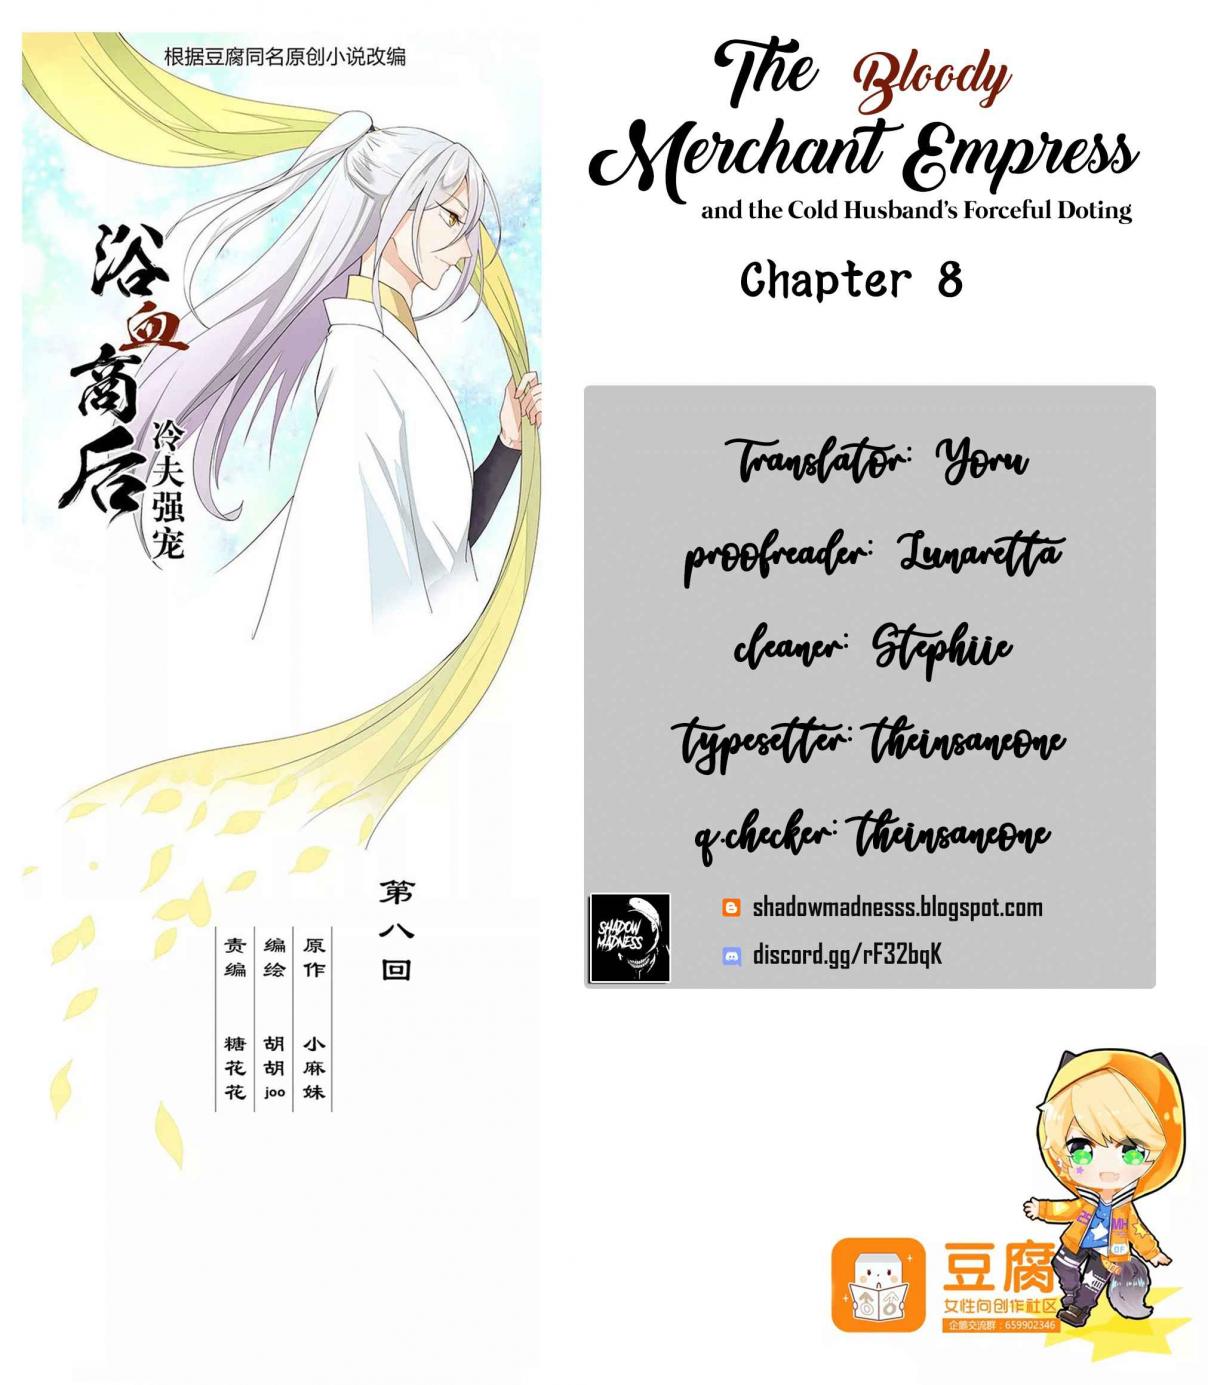 The Bloody Merchant Empress and the Cold Husband's Forceful Doting Ch. 8